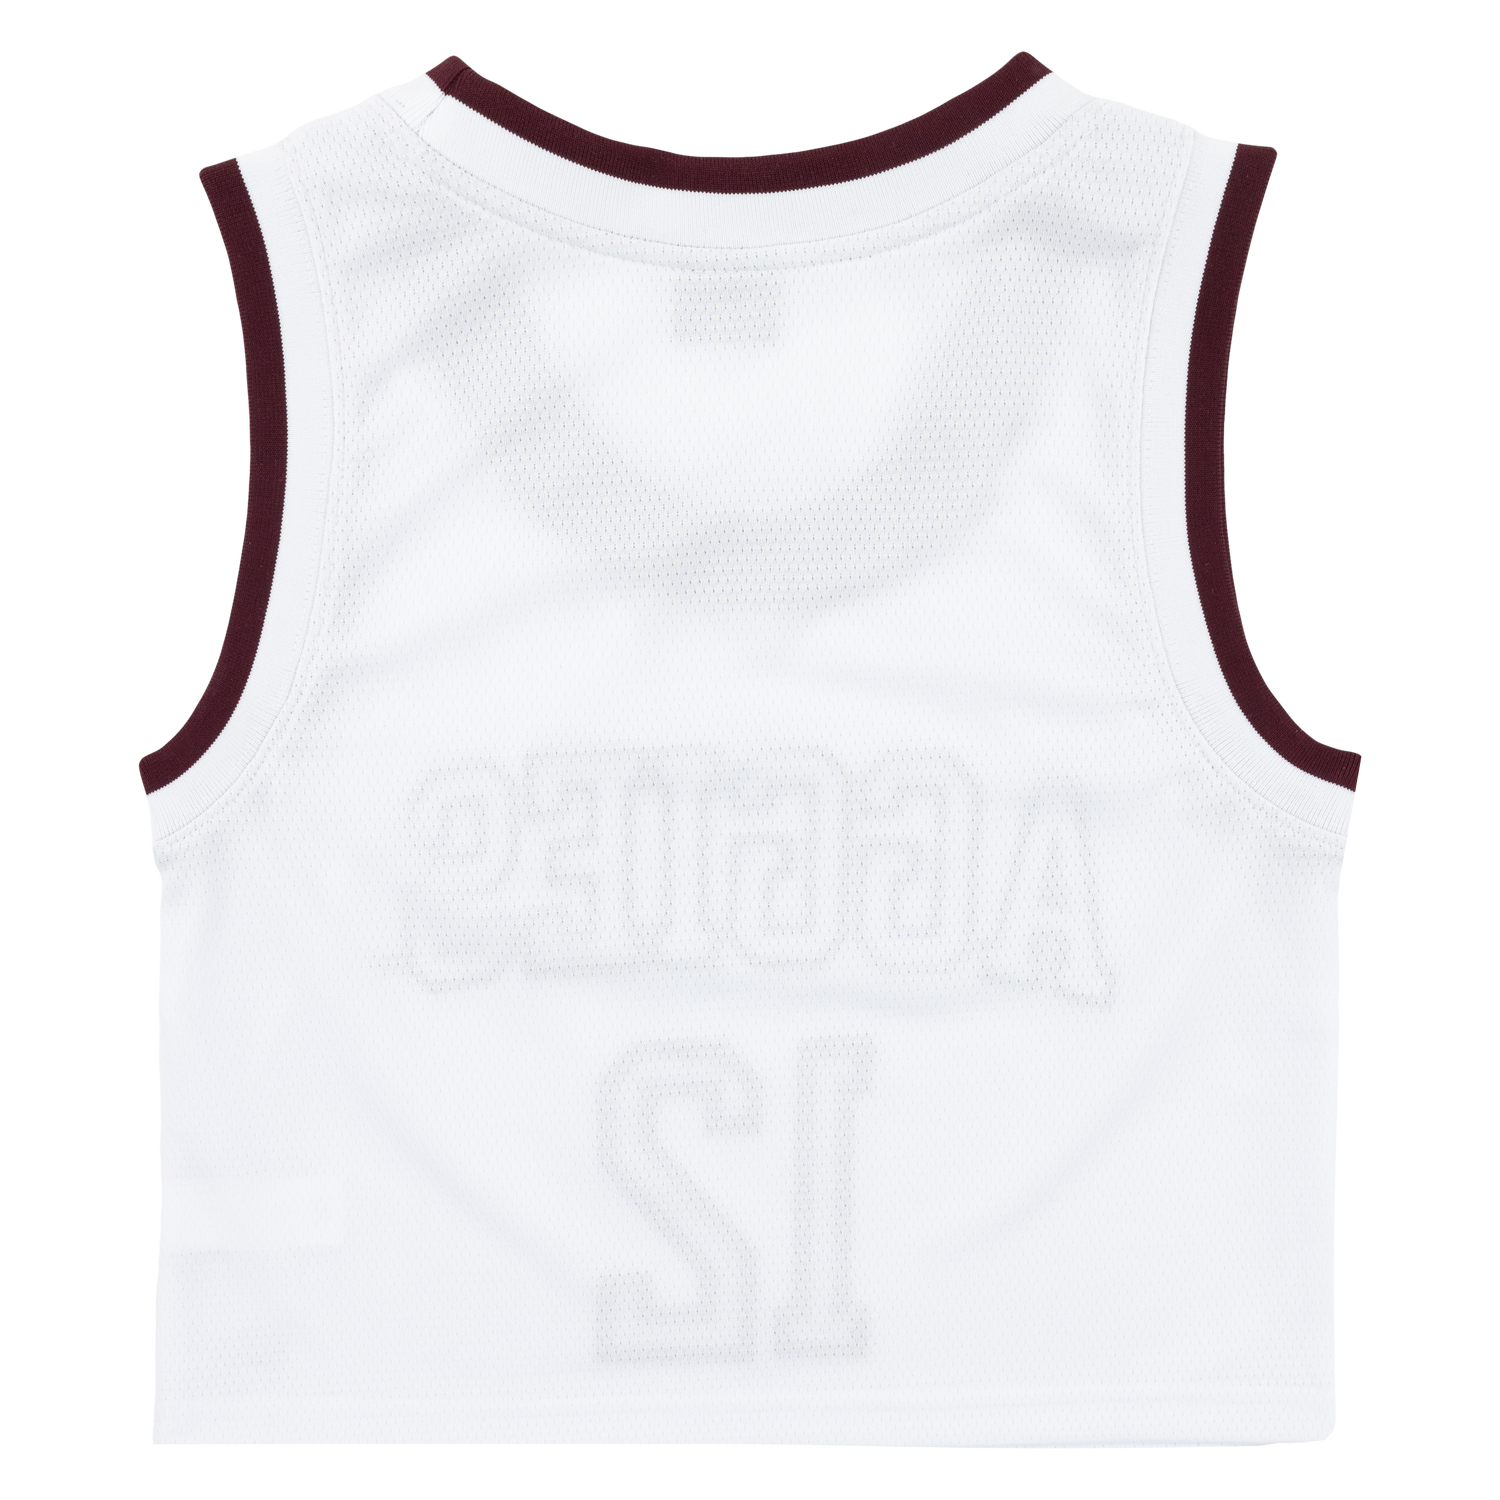 Texas A&M Aggies Cropped Basketball Jersey